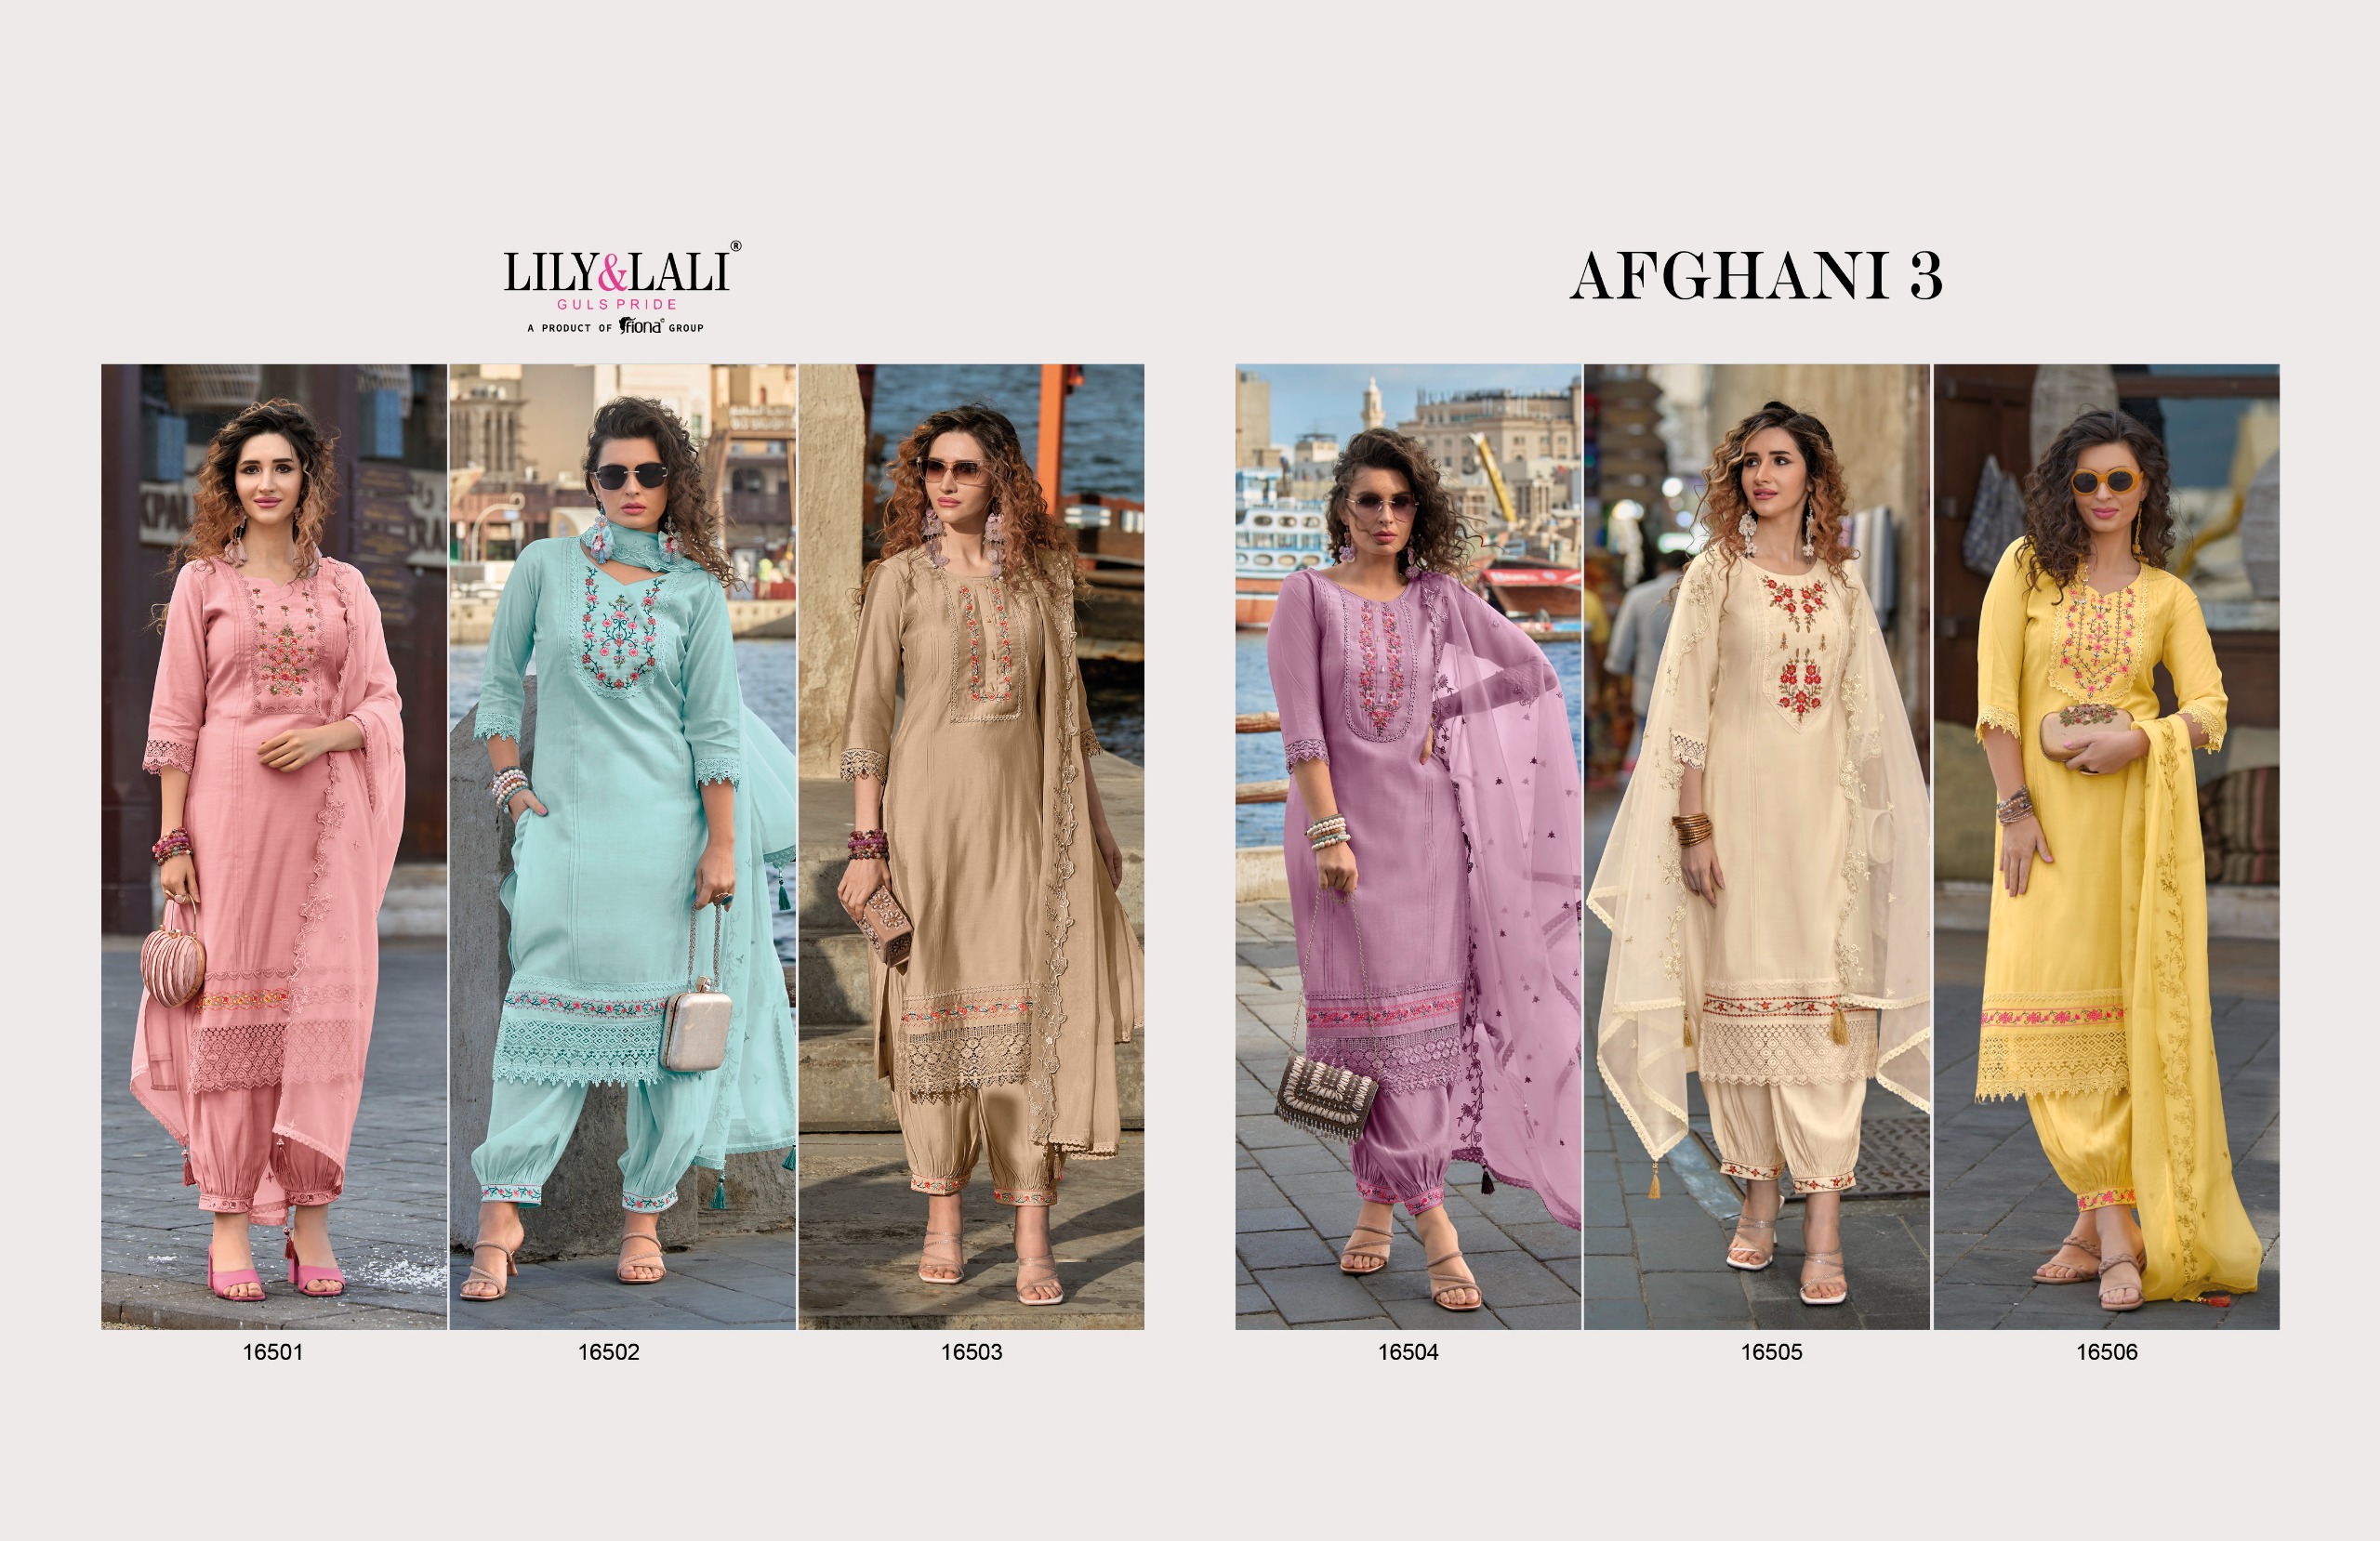 LILY & LALI AFGHANI-3 16501 TO 16506